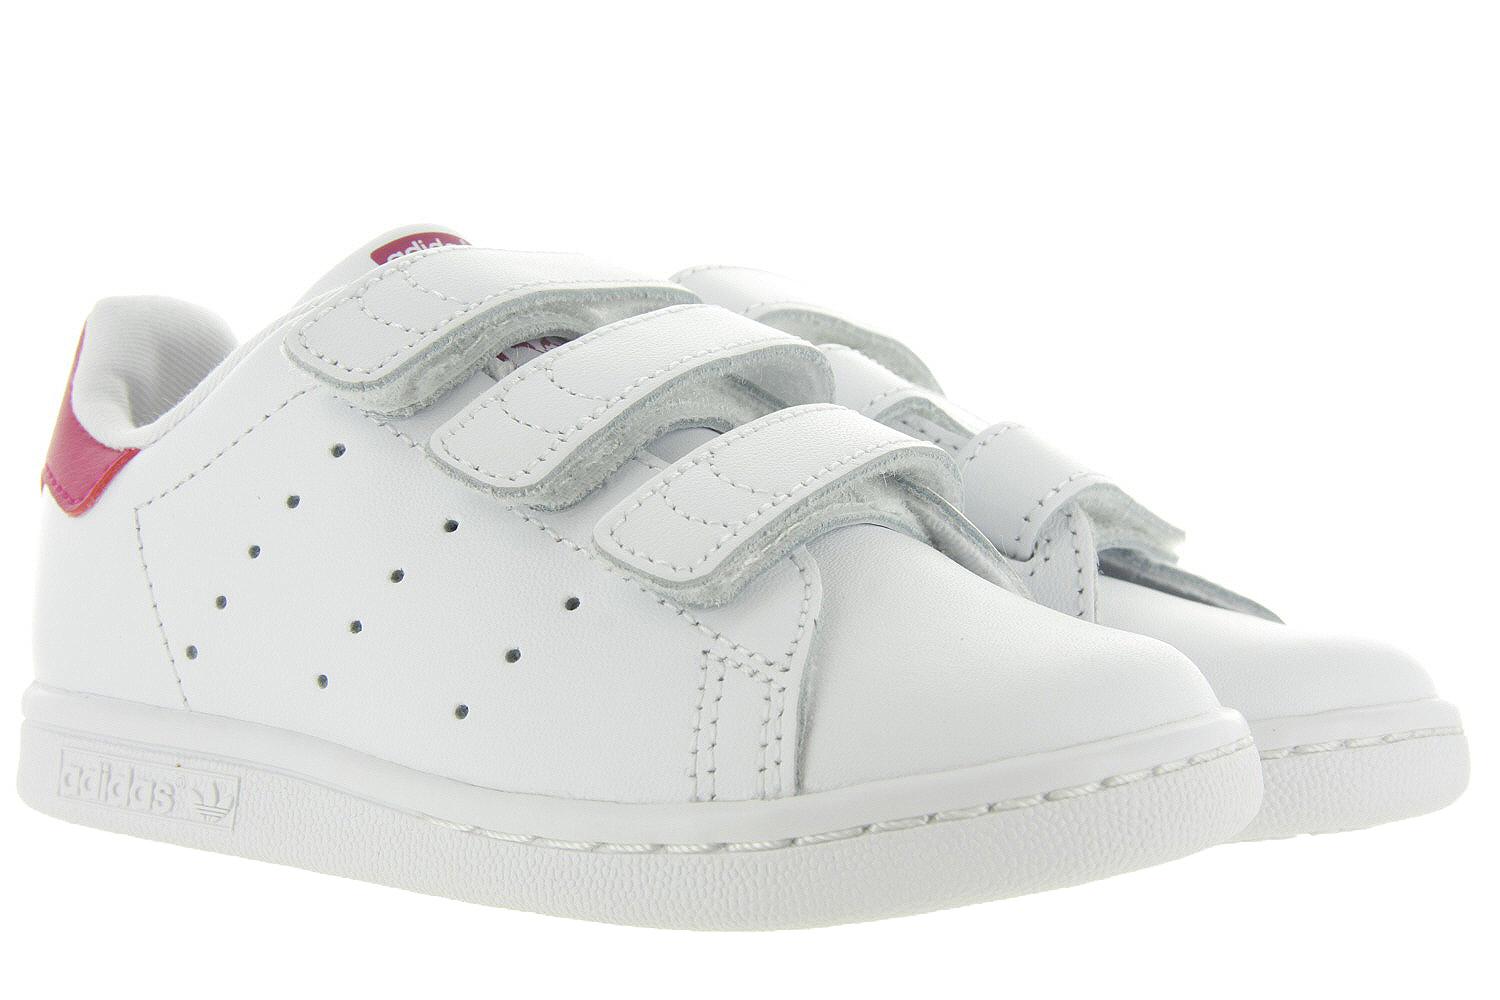 Stan Smith Klittenband Top Sellers, SAVE 34% - online-pmo.com